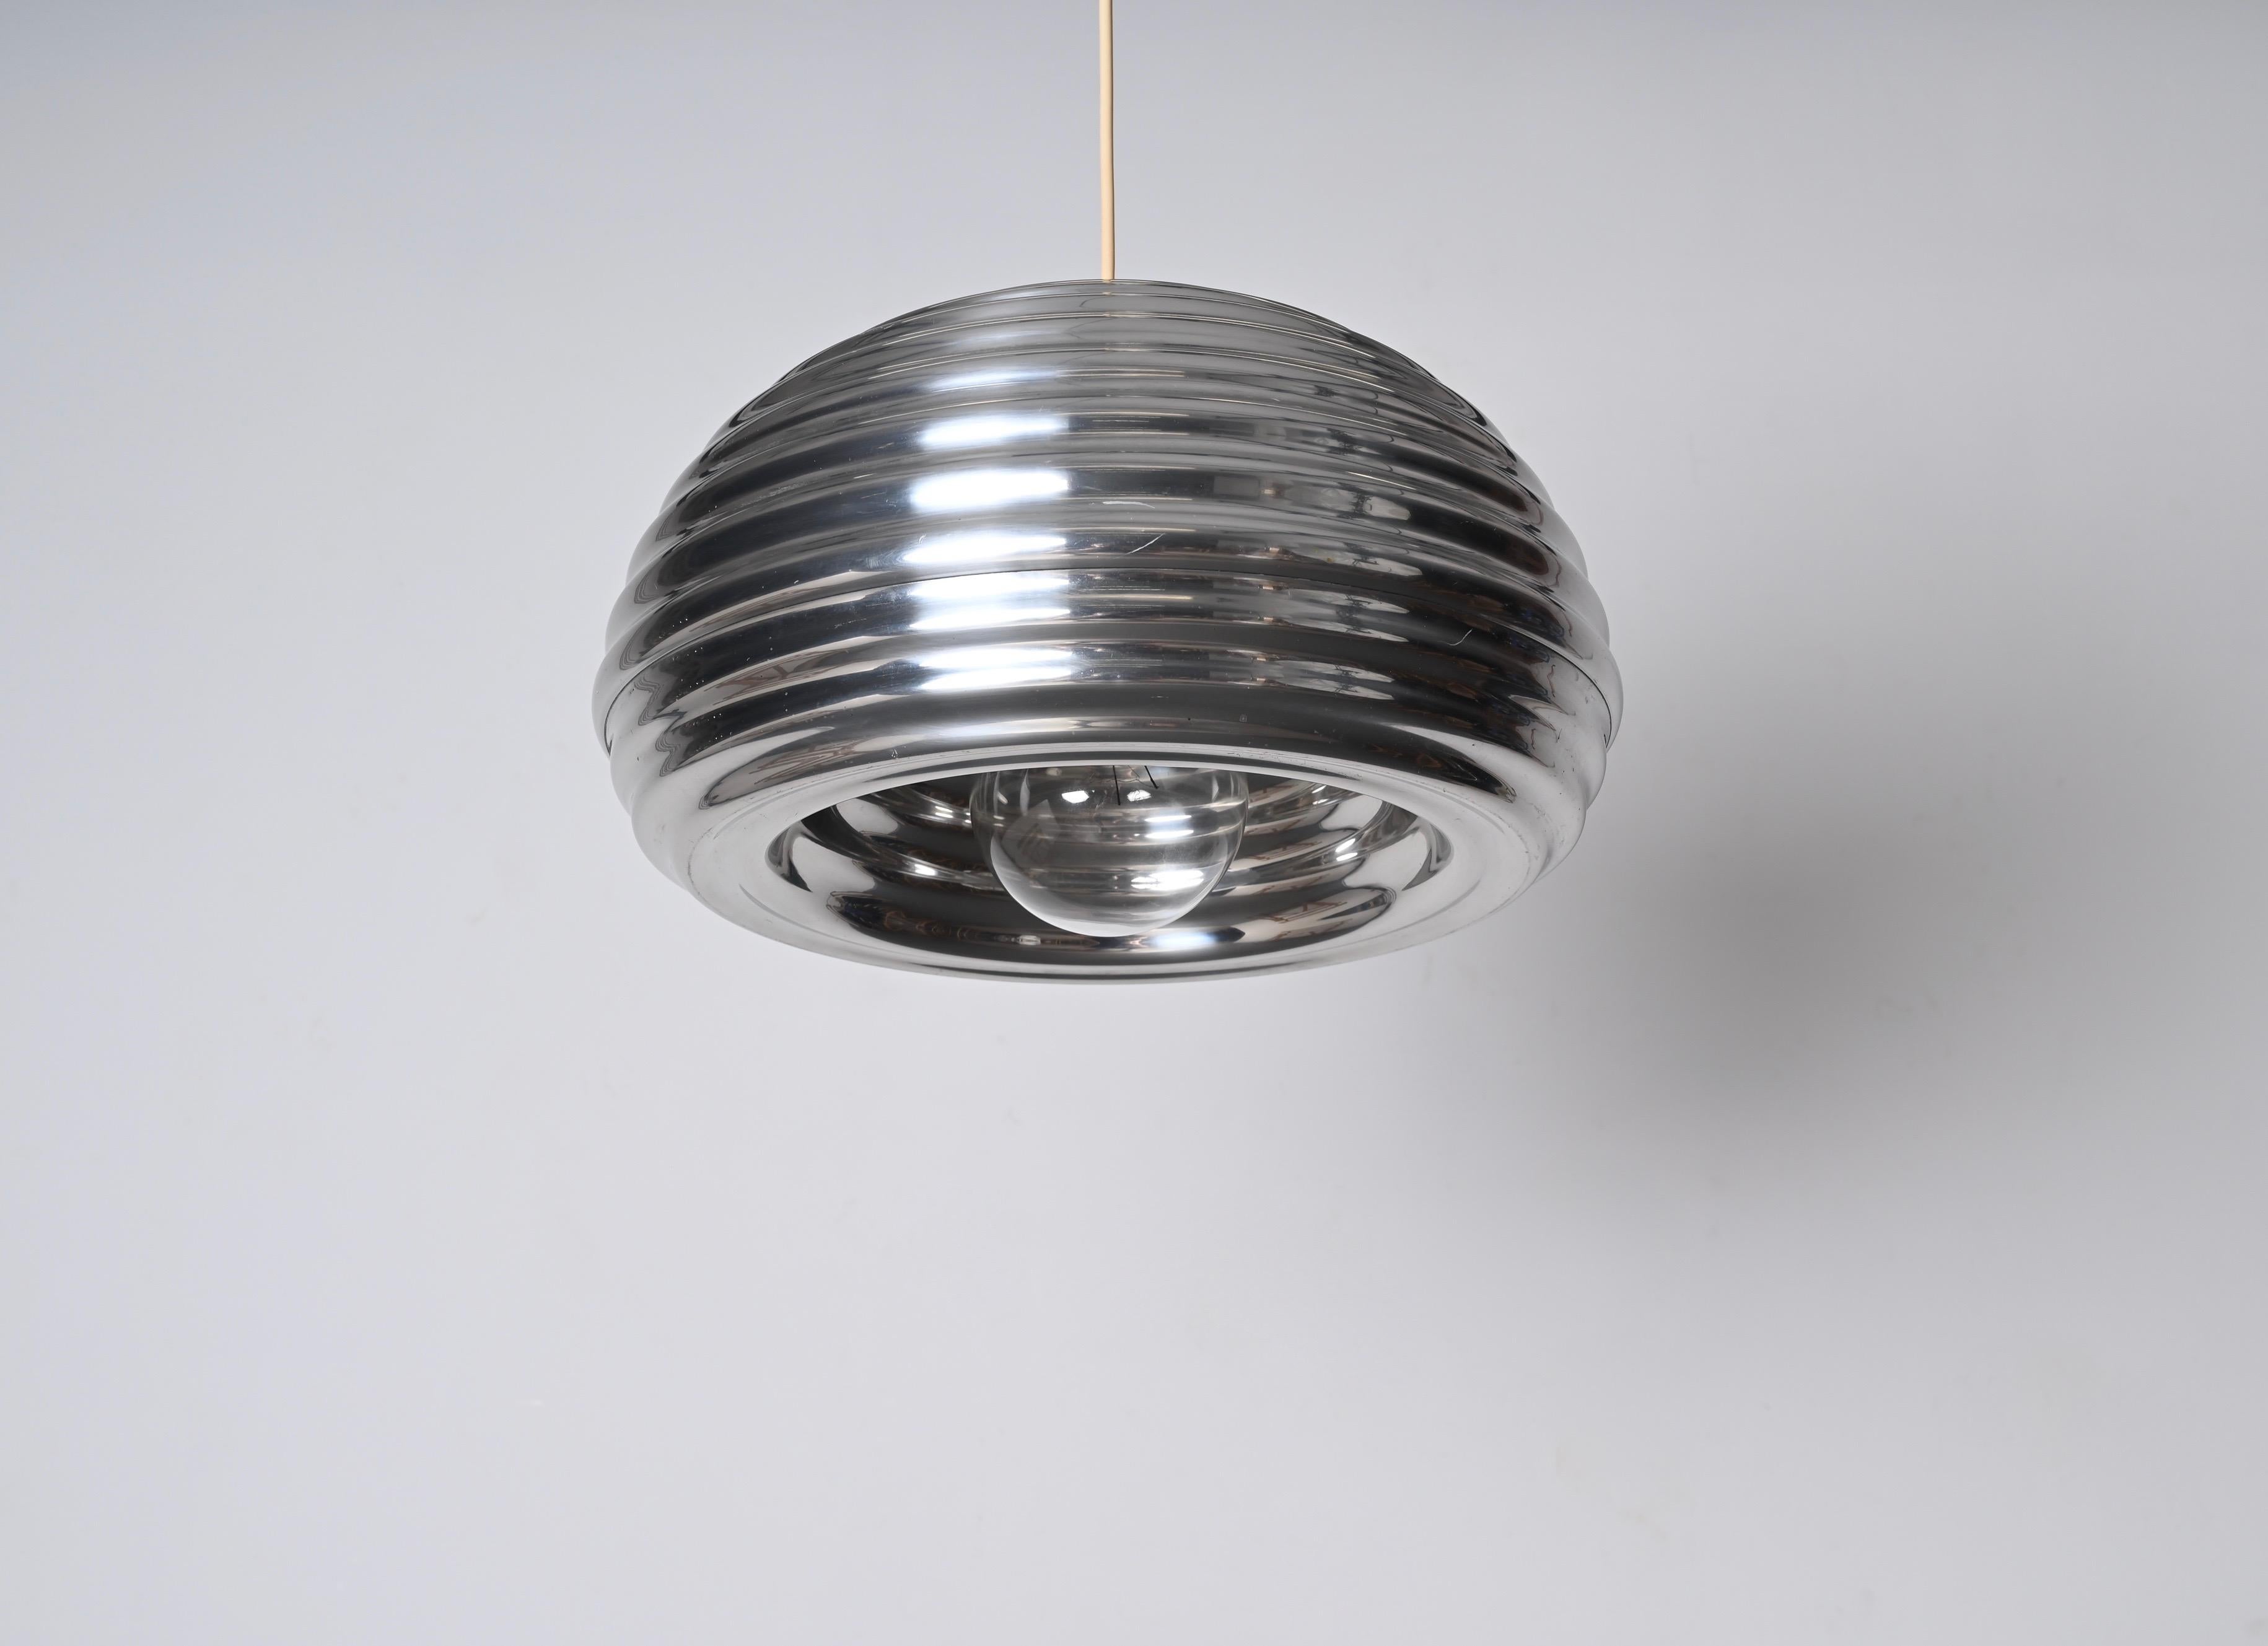 Fantastic vintage Splugen Brau pendant lamp in aluminium designed by Achille Castiglioni and produced by Flos in the 1960s in Italy. This lovely pendant still has its original sticker signed by FLOS.

This stunning pendant was designed by the